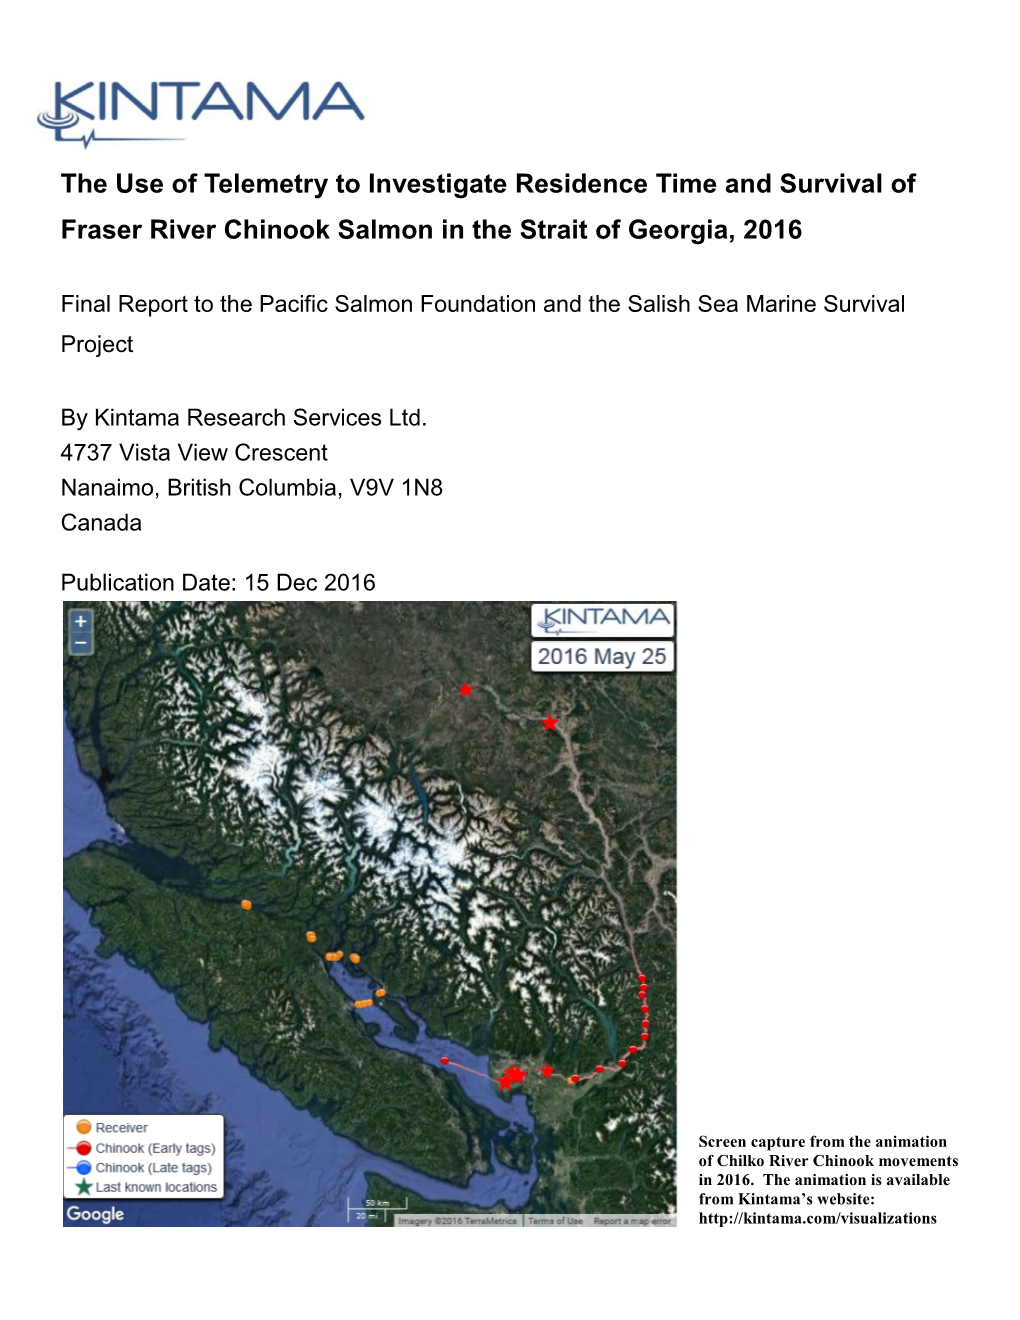 The Use of Telemetry to Investigate Residence Time and Survival of Fraser River Chinook Salmon in the Strait of Georgia, 2016